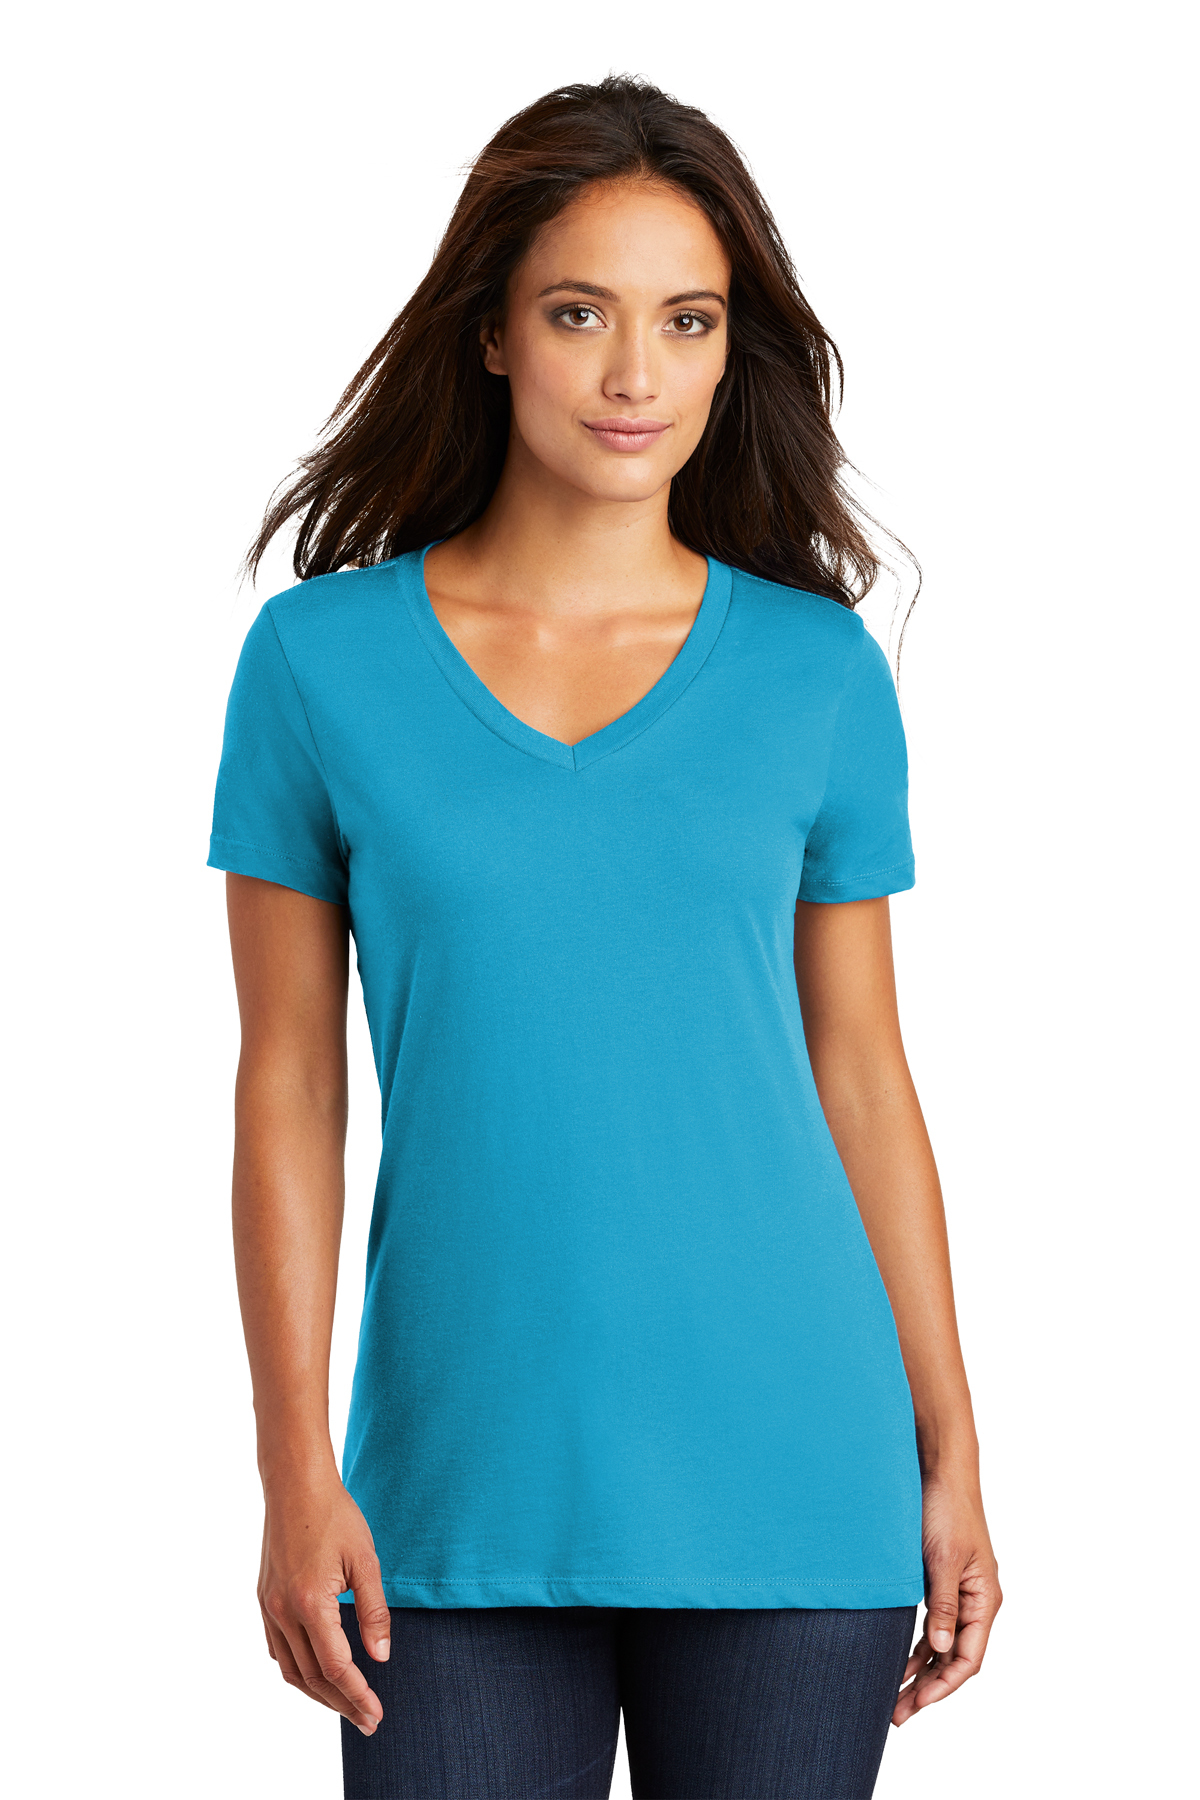 District Women’s Perfect Weight V-Neck Tee | Product | SanMar